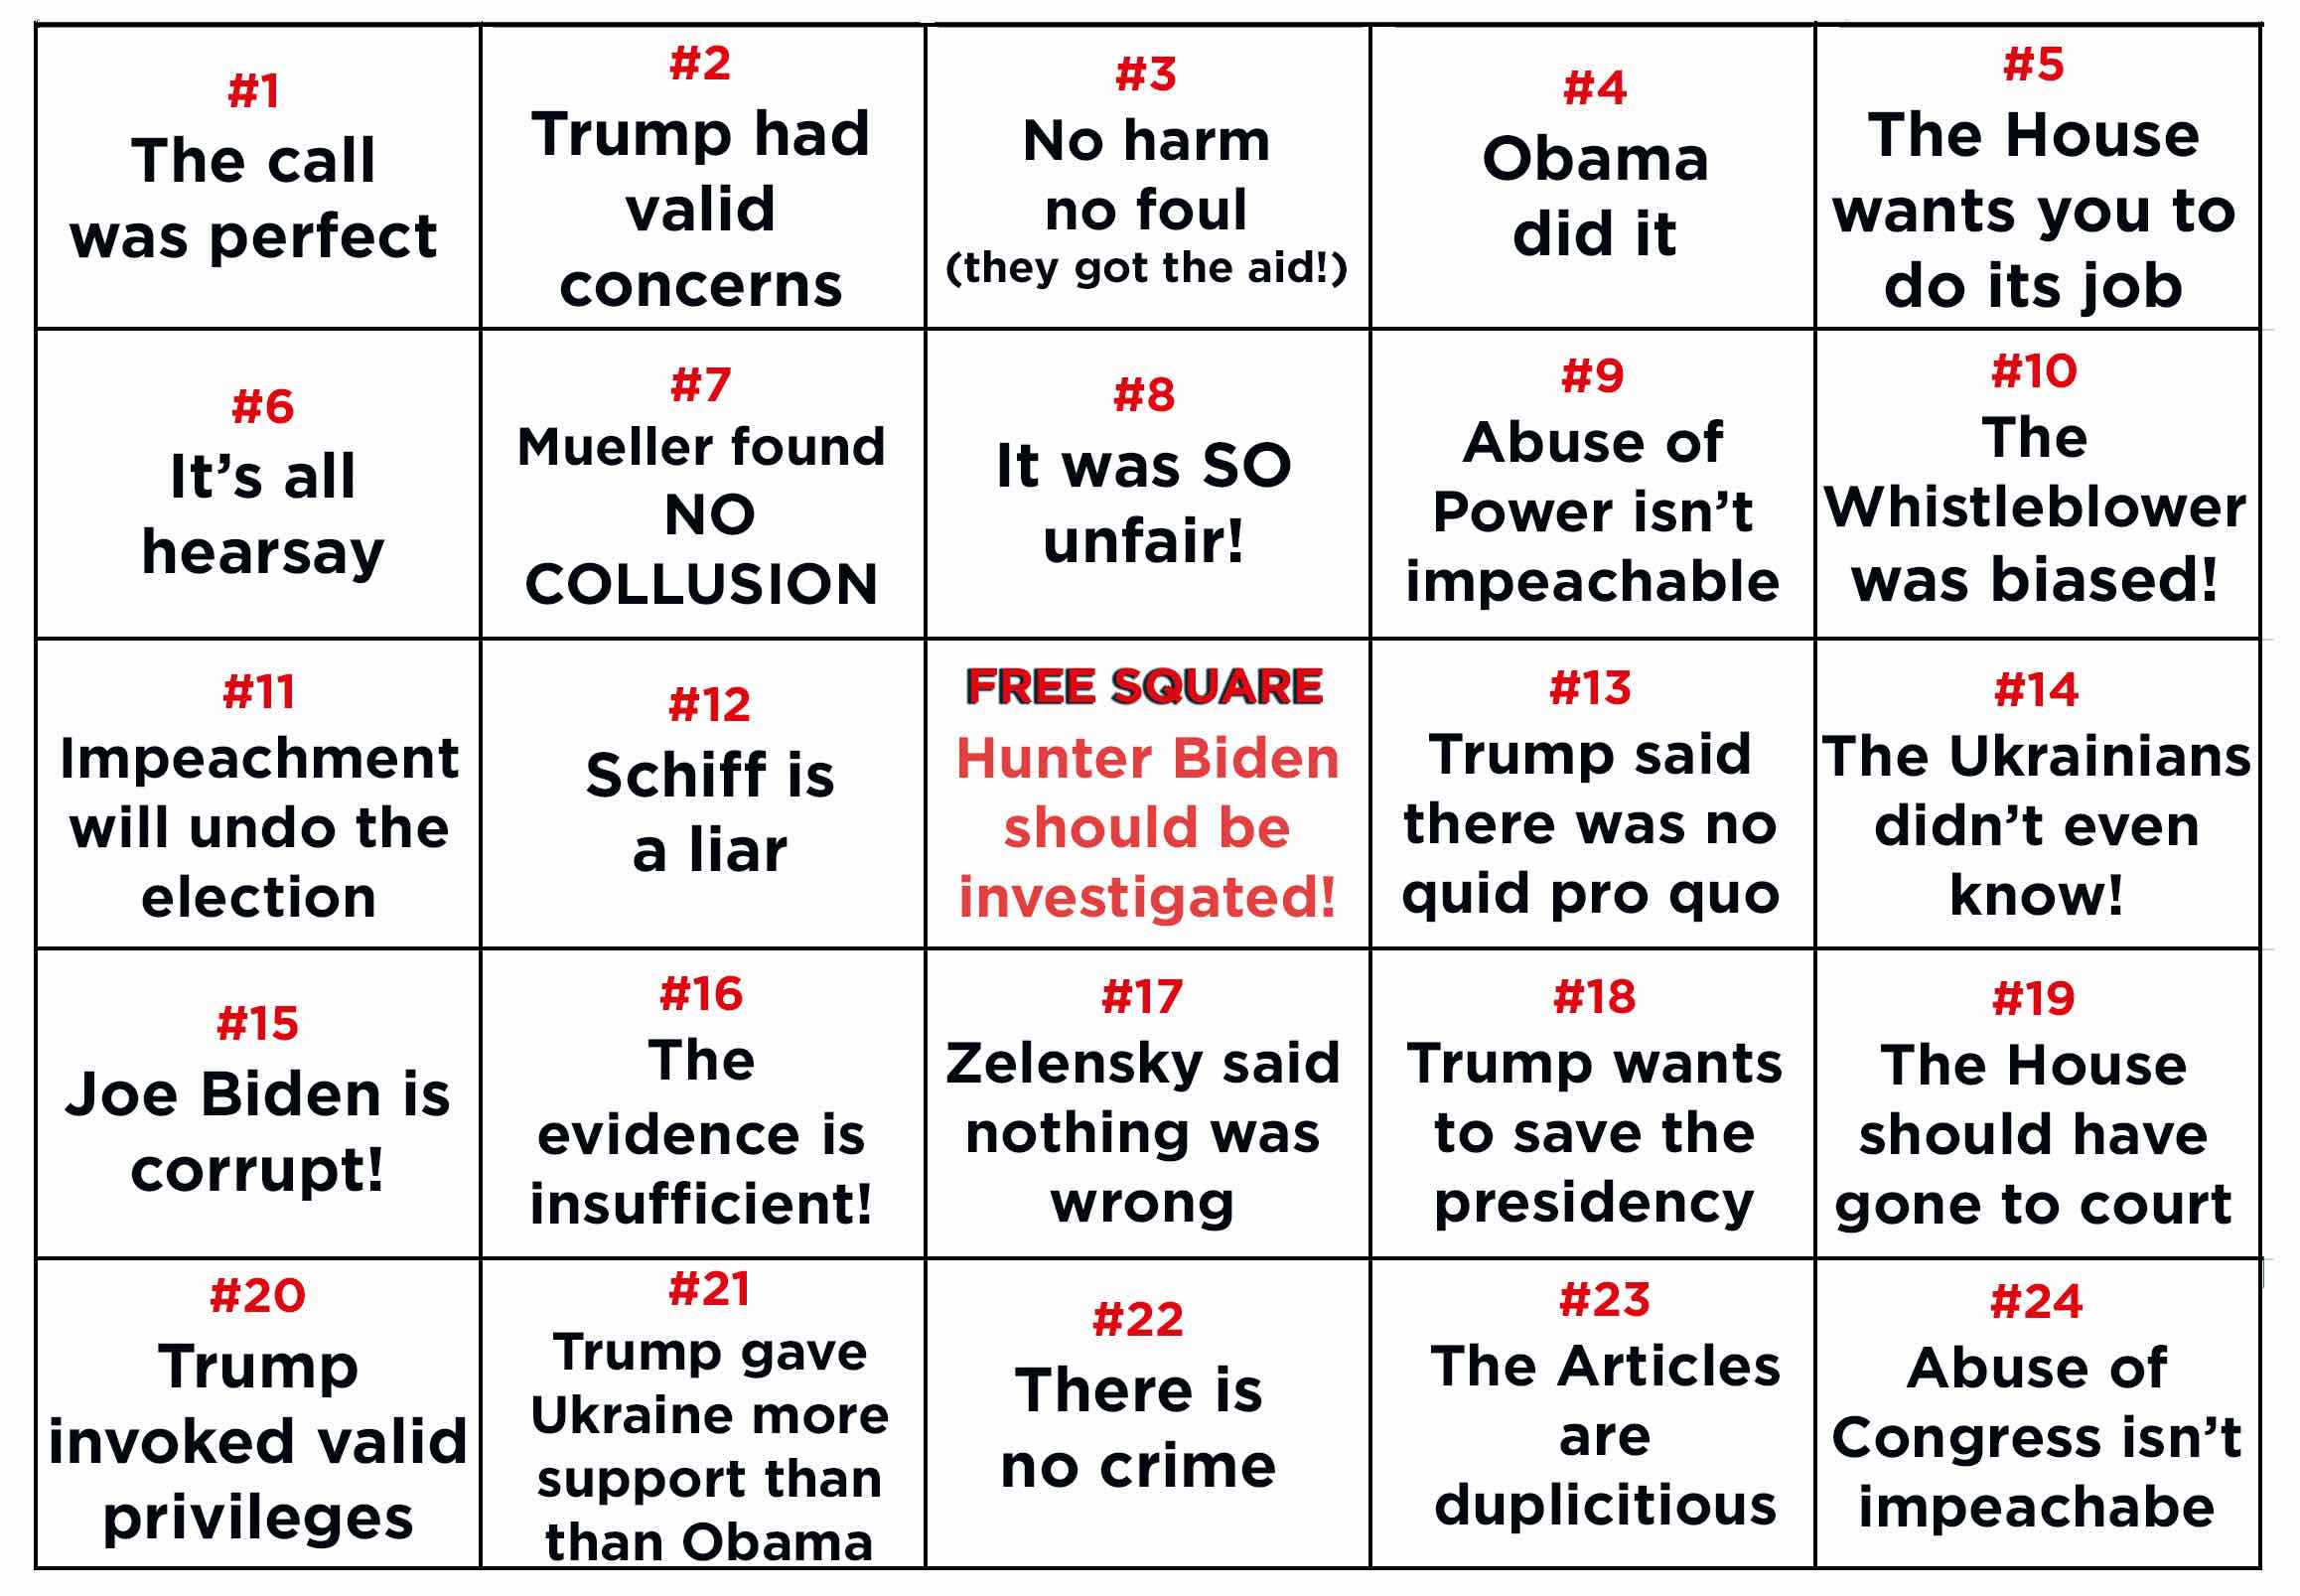 It's a 5x5 card, with items such as 
'It's all hearsay,' 'They got the aid,' 'Obama did it,' and 'The House should have gone to court.'